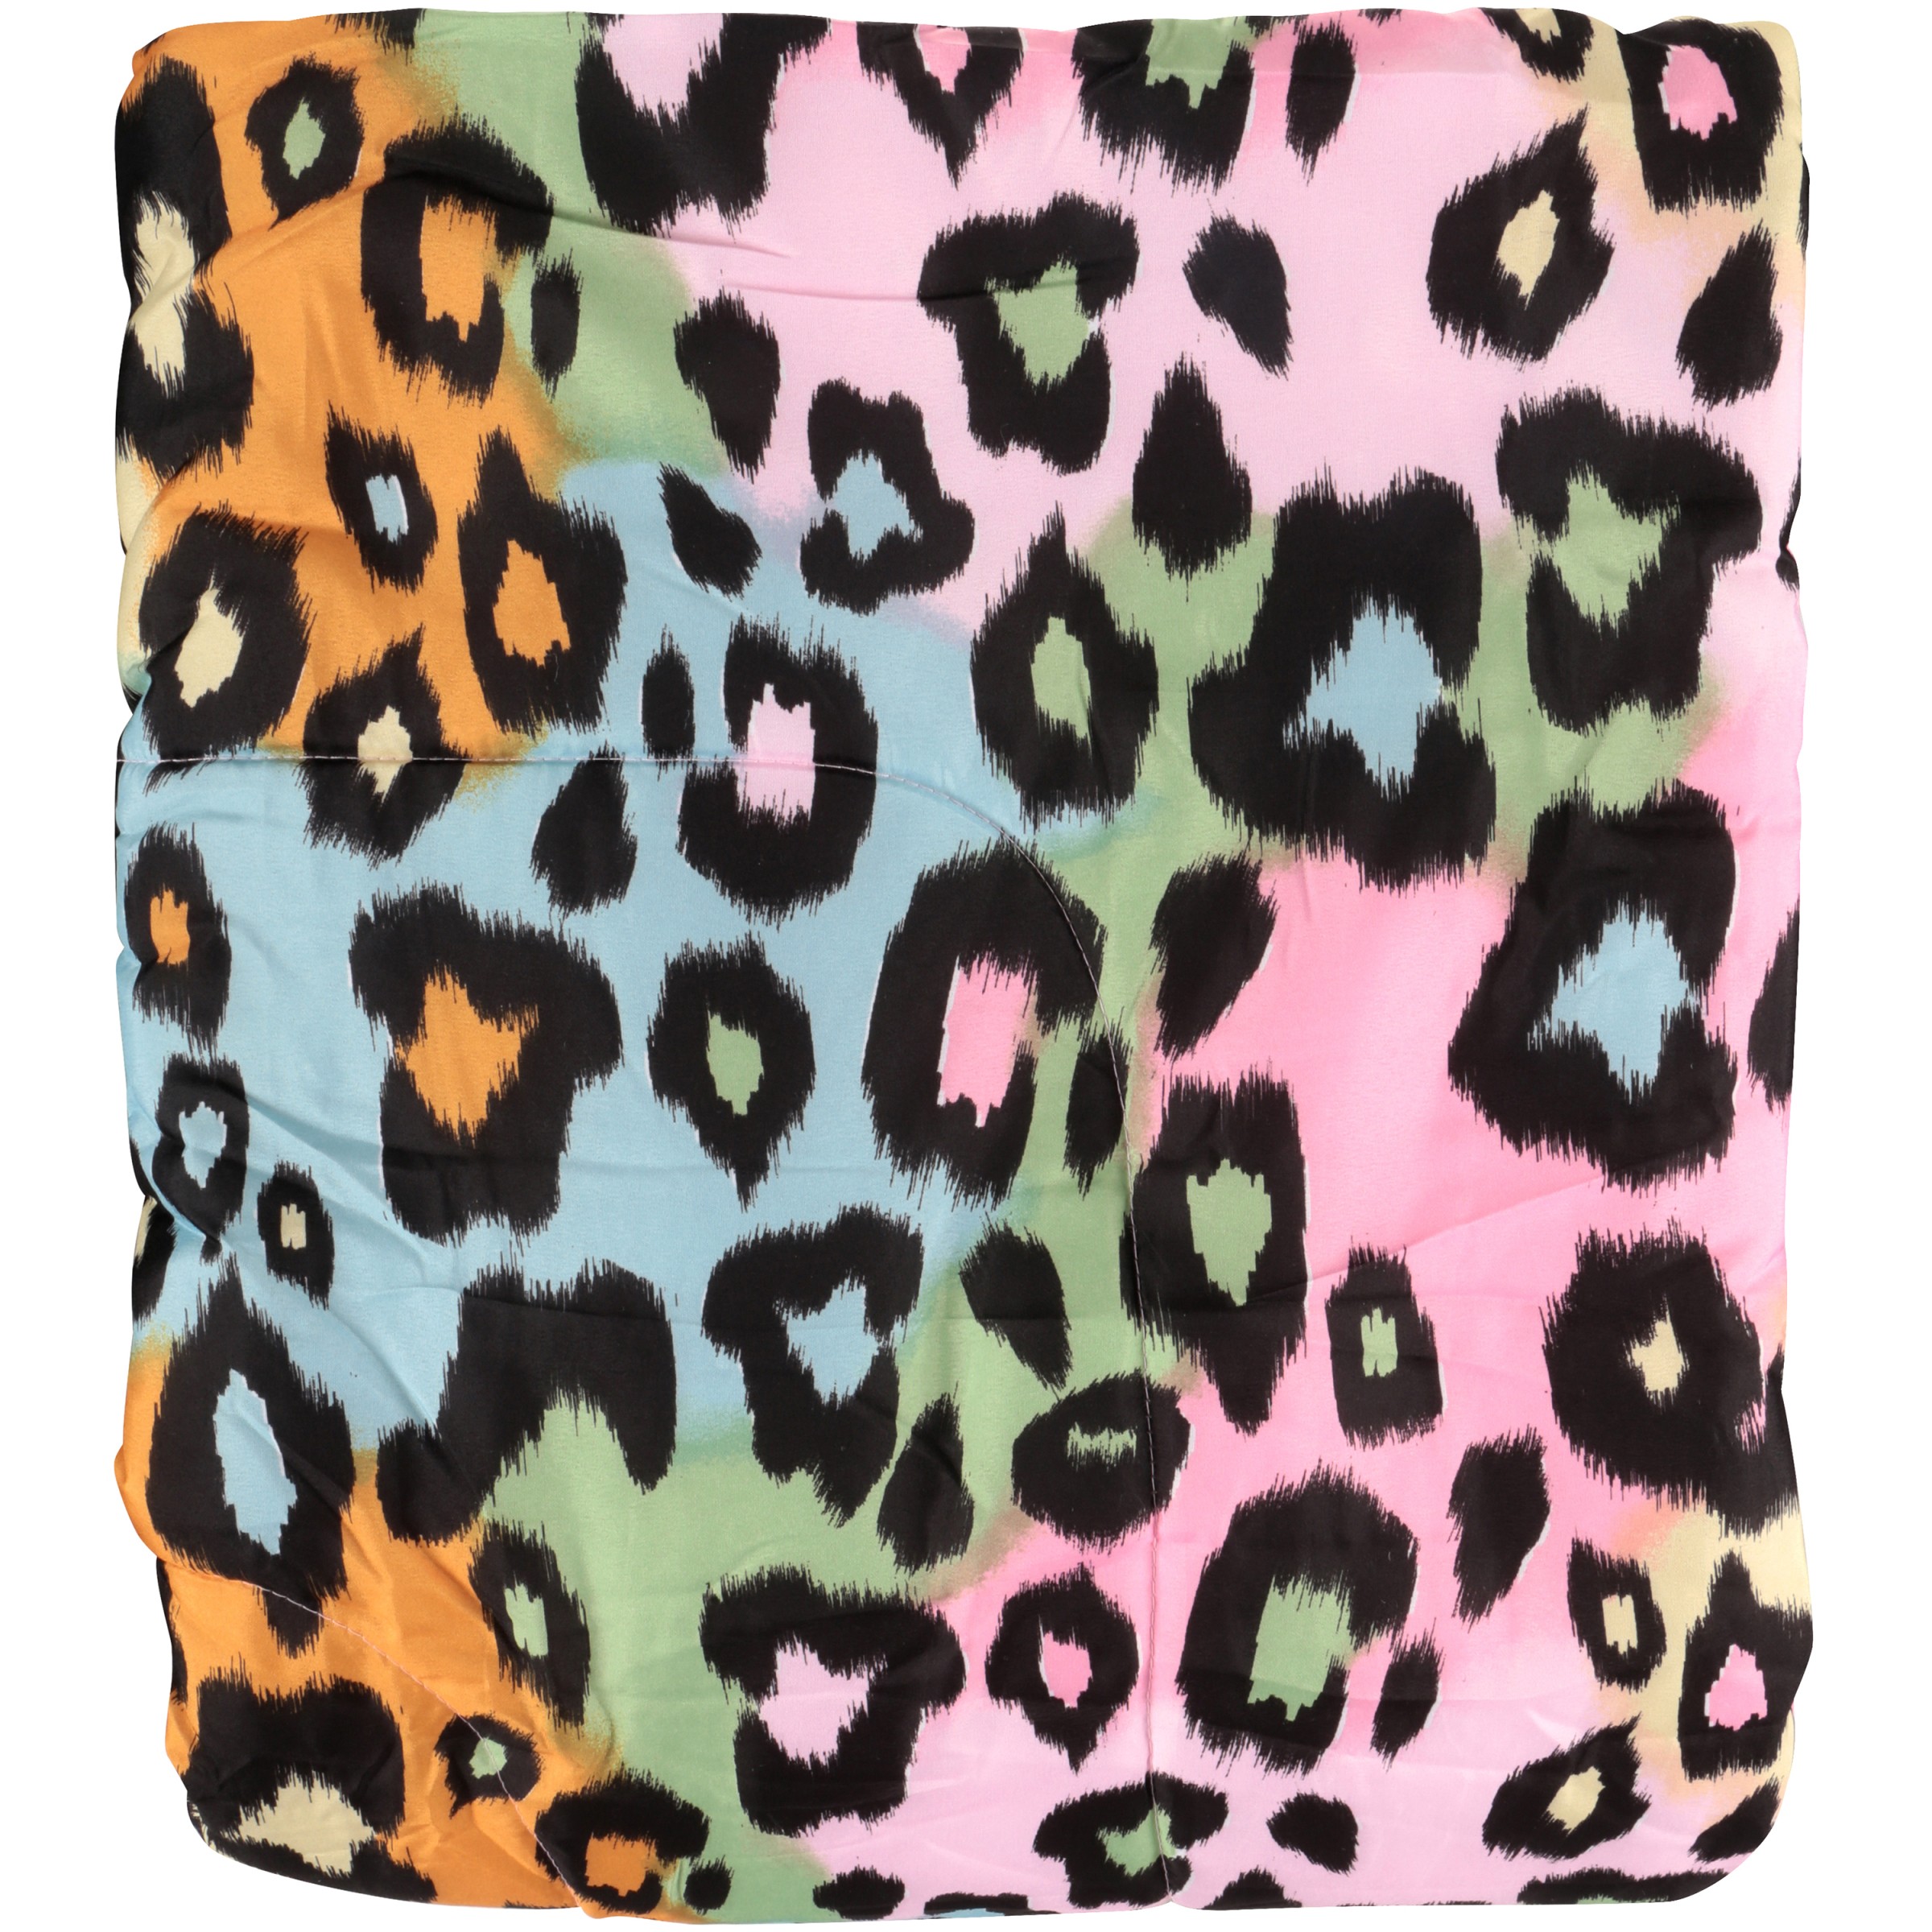 My Room Leopard Twin 5 Piece Bed in a Bag Bedding Set, Polyester, Pink, Sky Blue, Multi, Female, Child - image 3 of 4